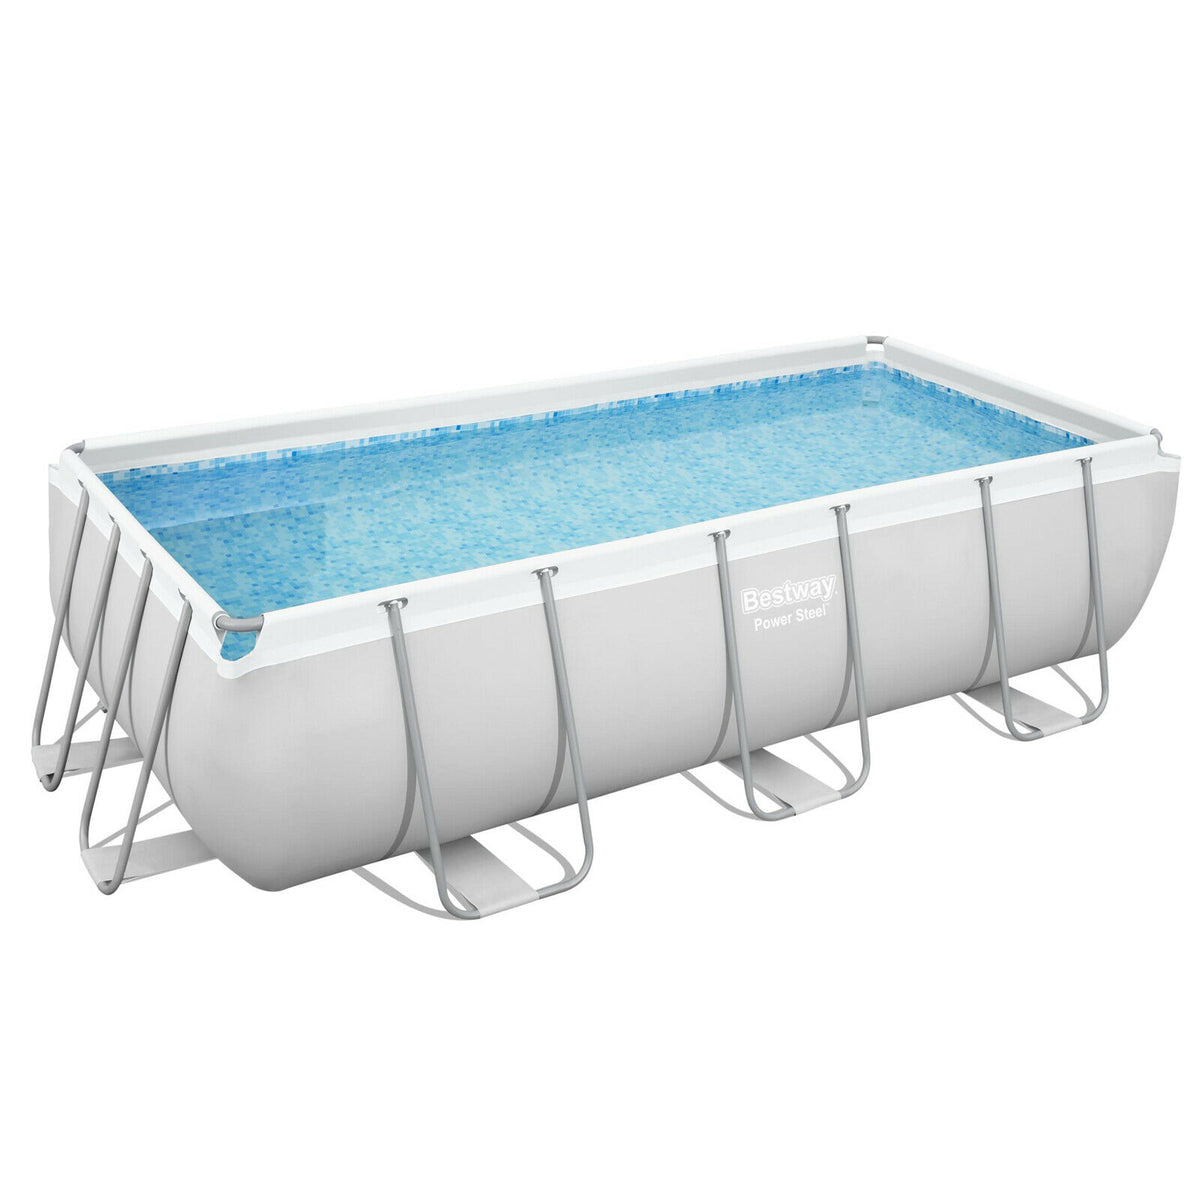 SWIMLINE SUPER DELUXE 35' x 60' Rectangle Winter Inground Swimming Pool  Cover 15 Year Limited Warranty SD3560RC